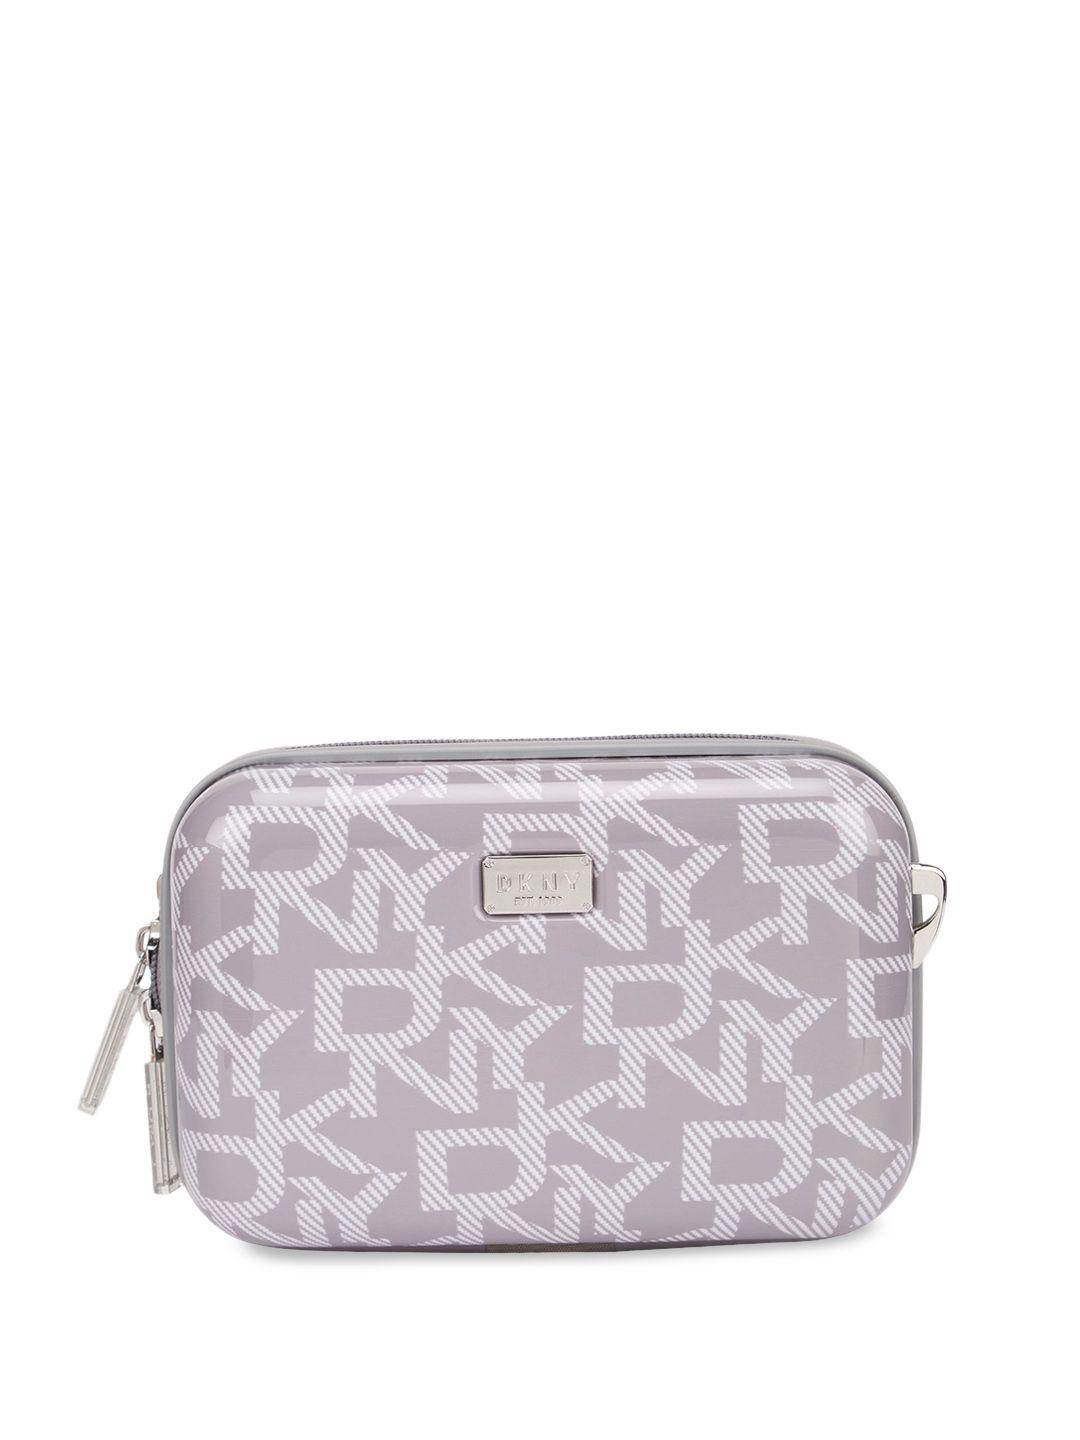 dkny abs hard beauty case makeup pouch